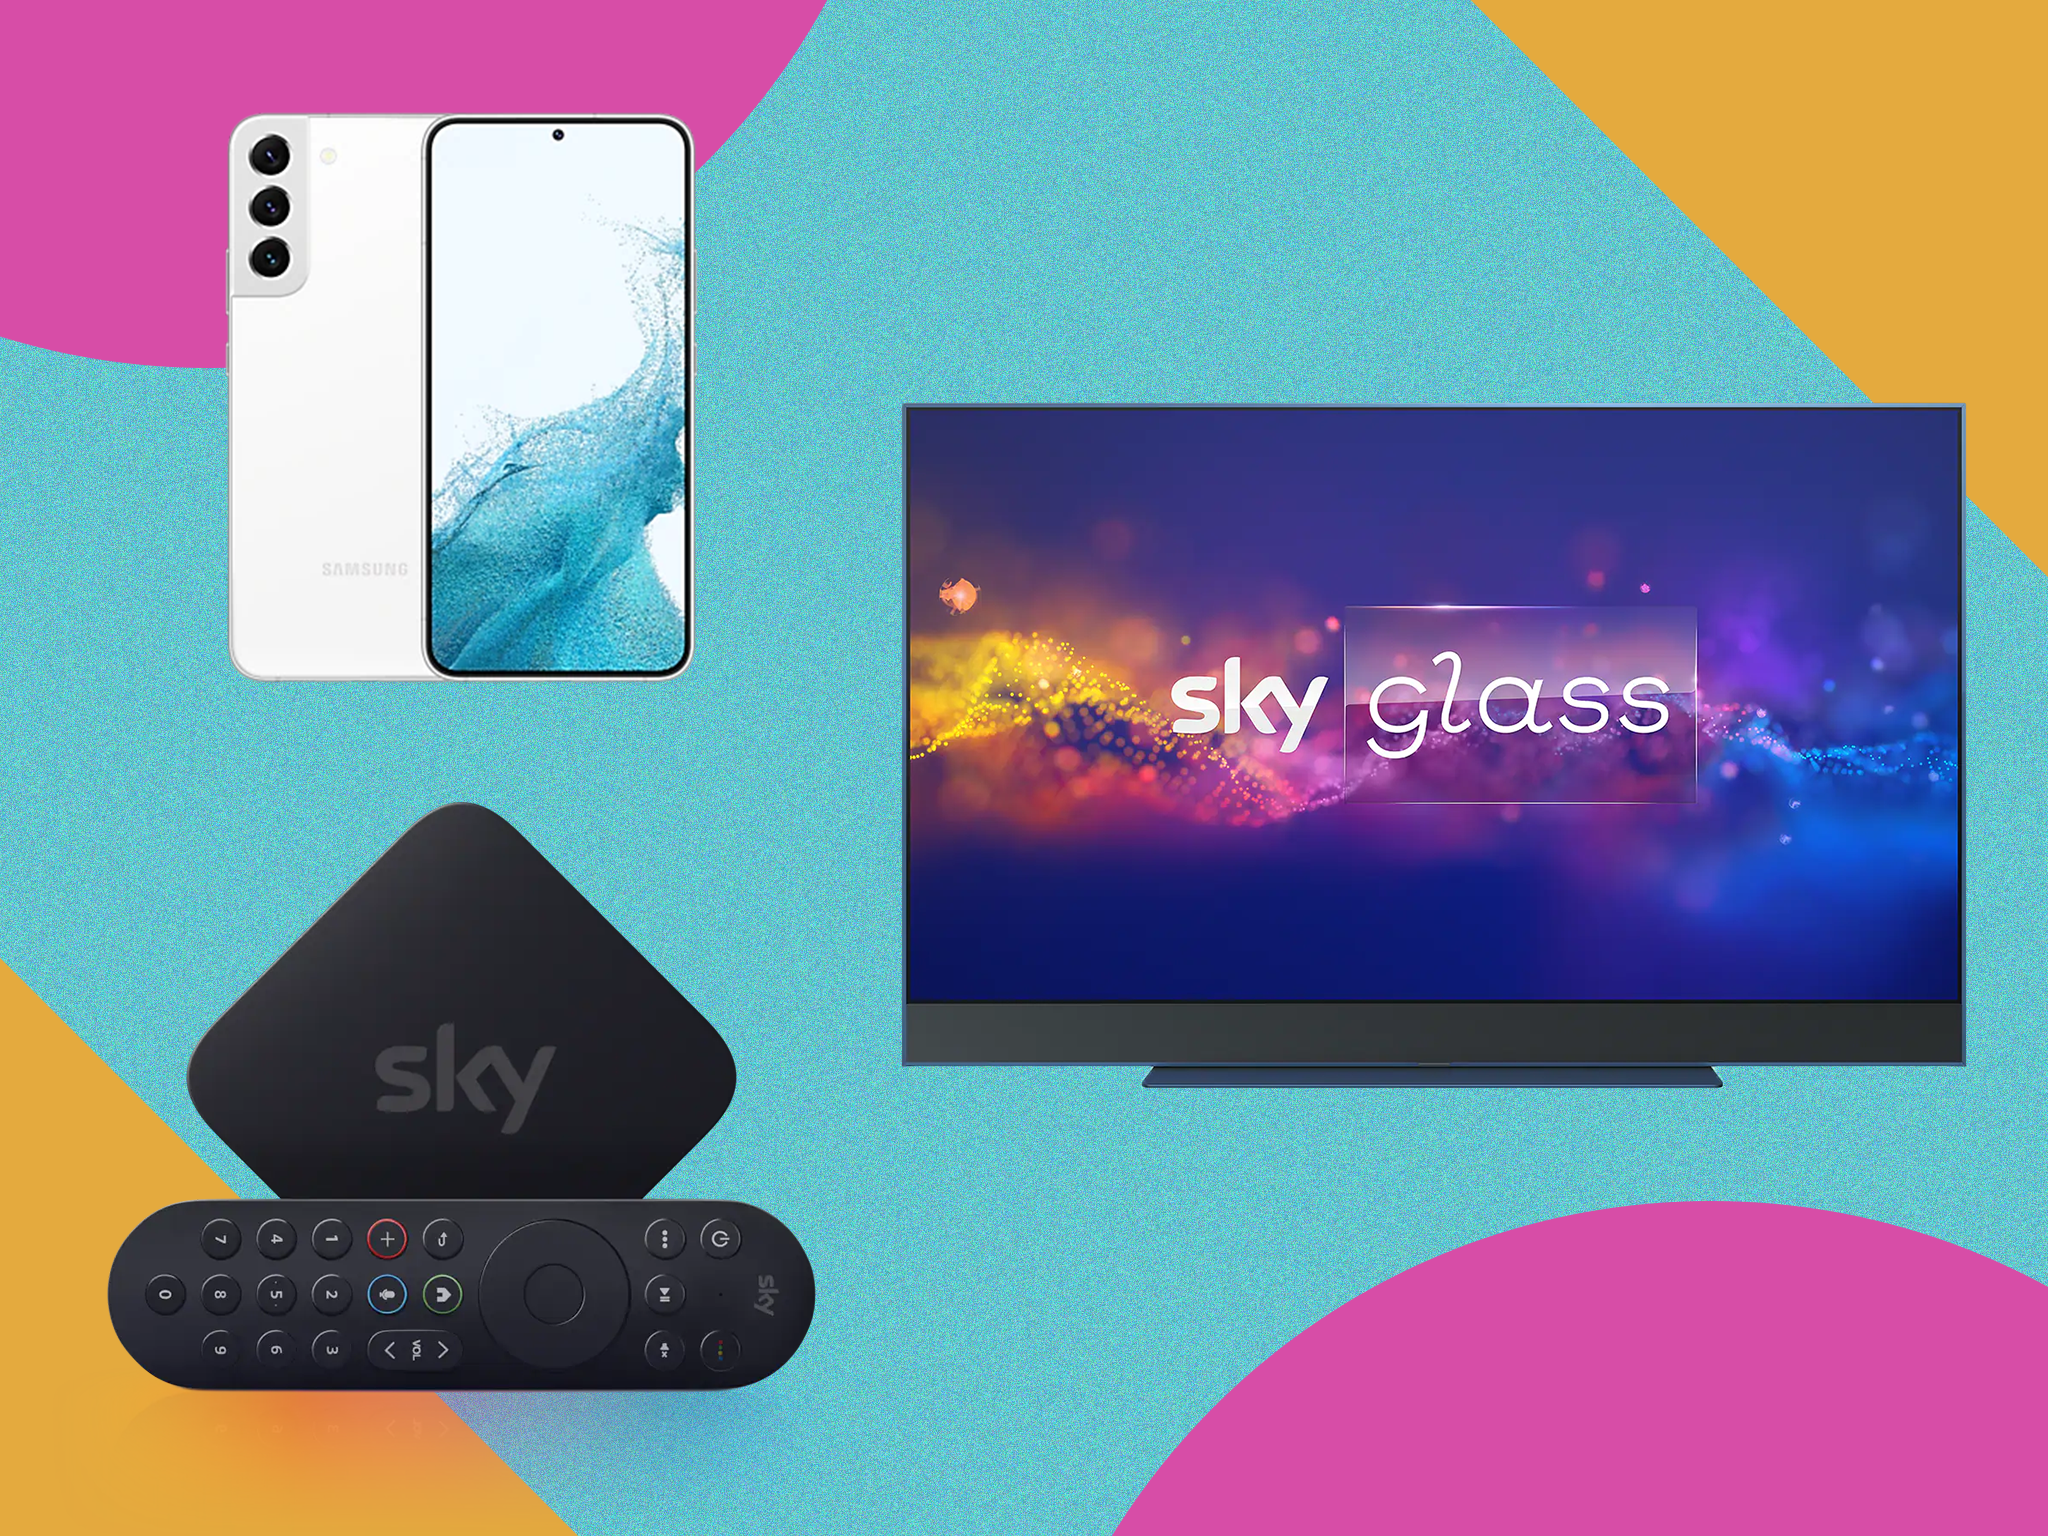 Save on glass, mobile deals and more